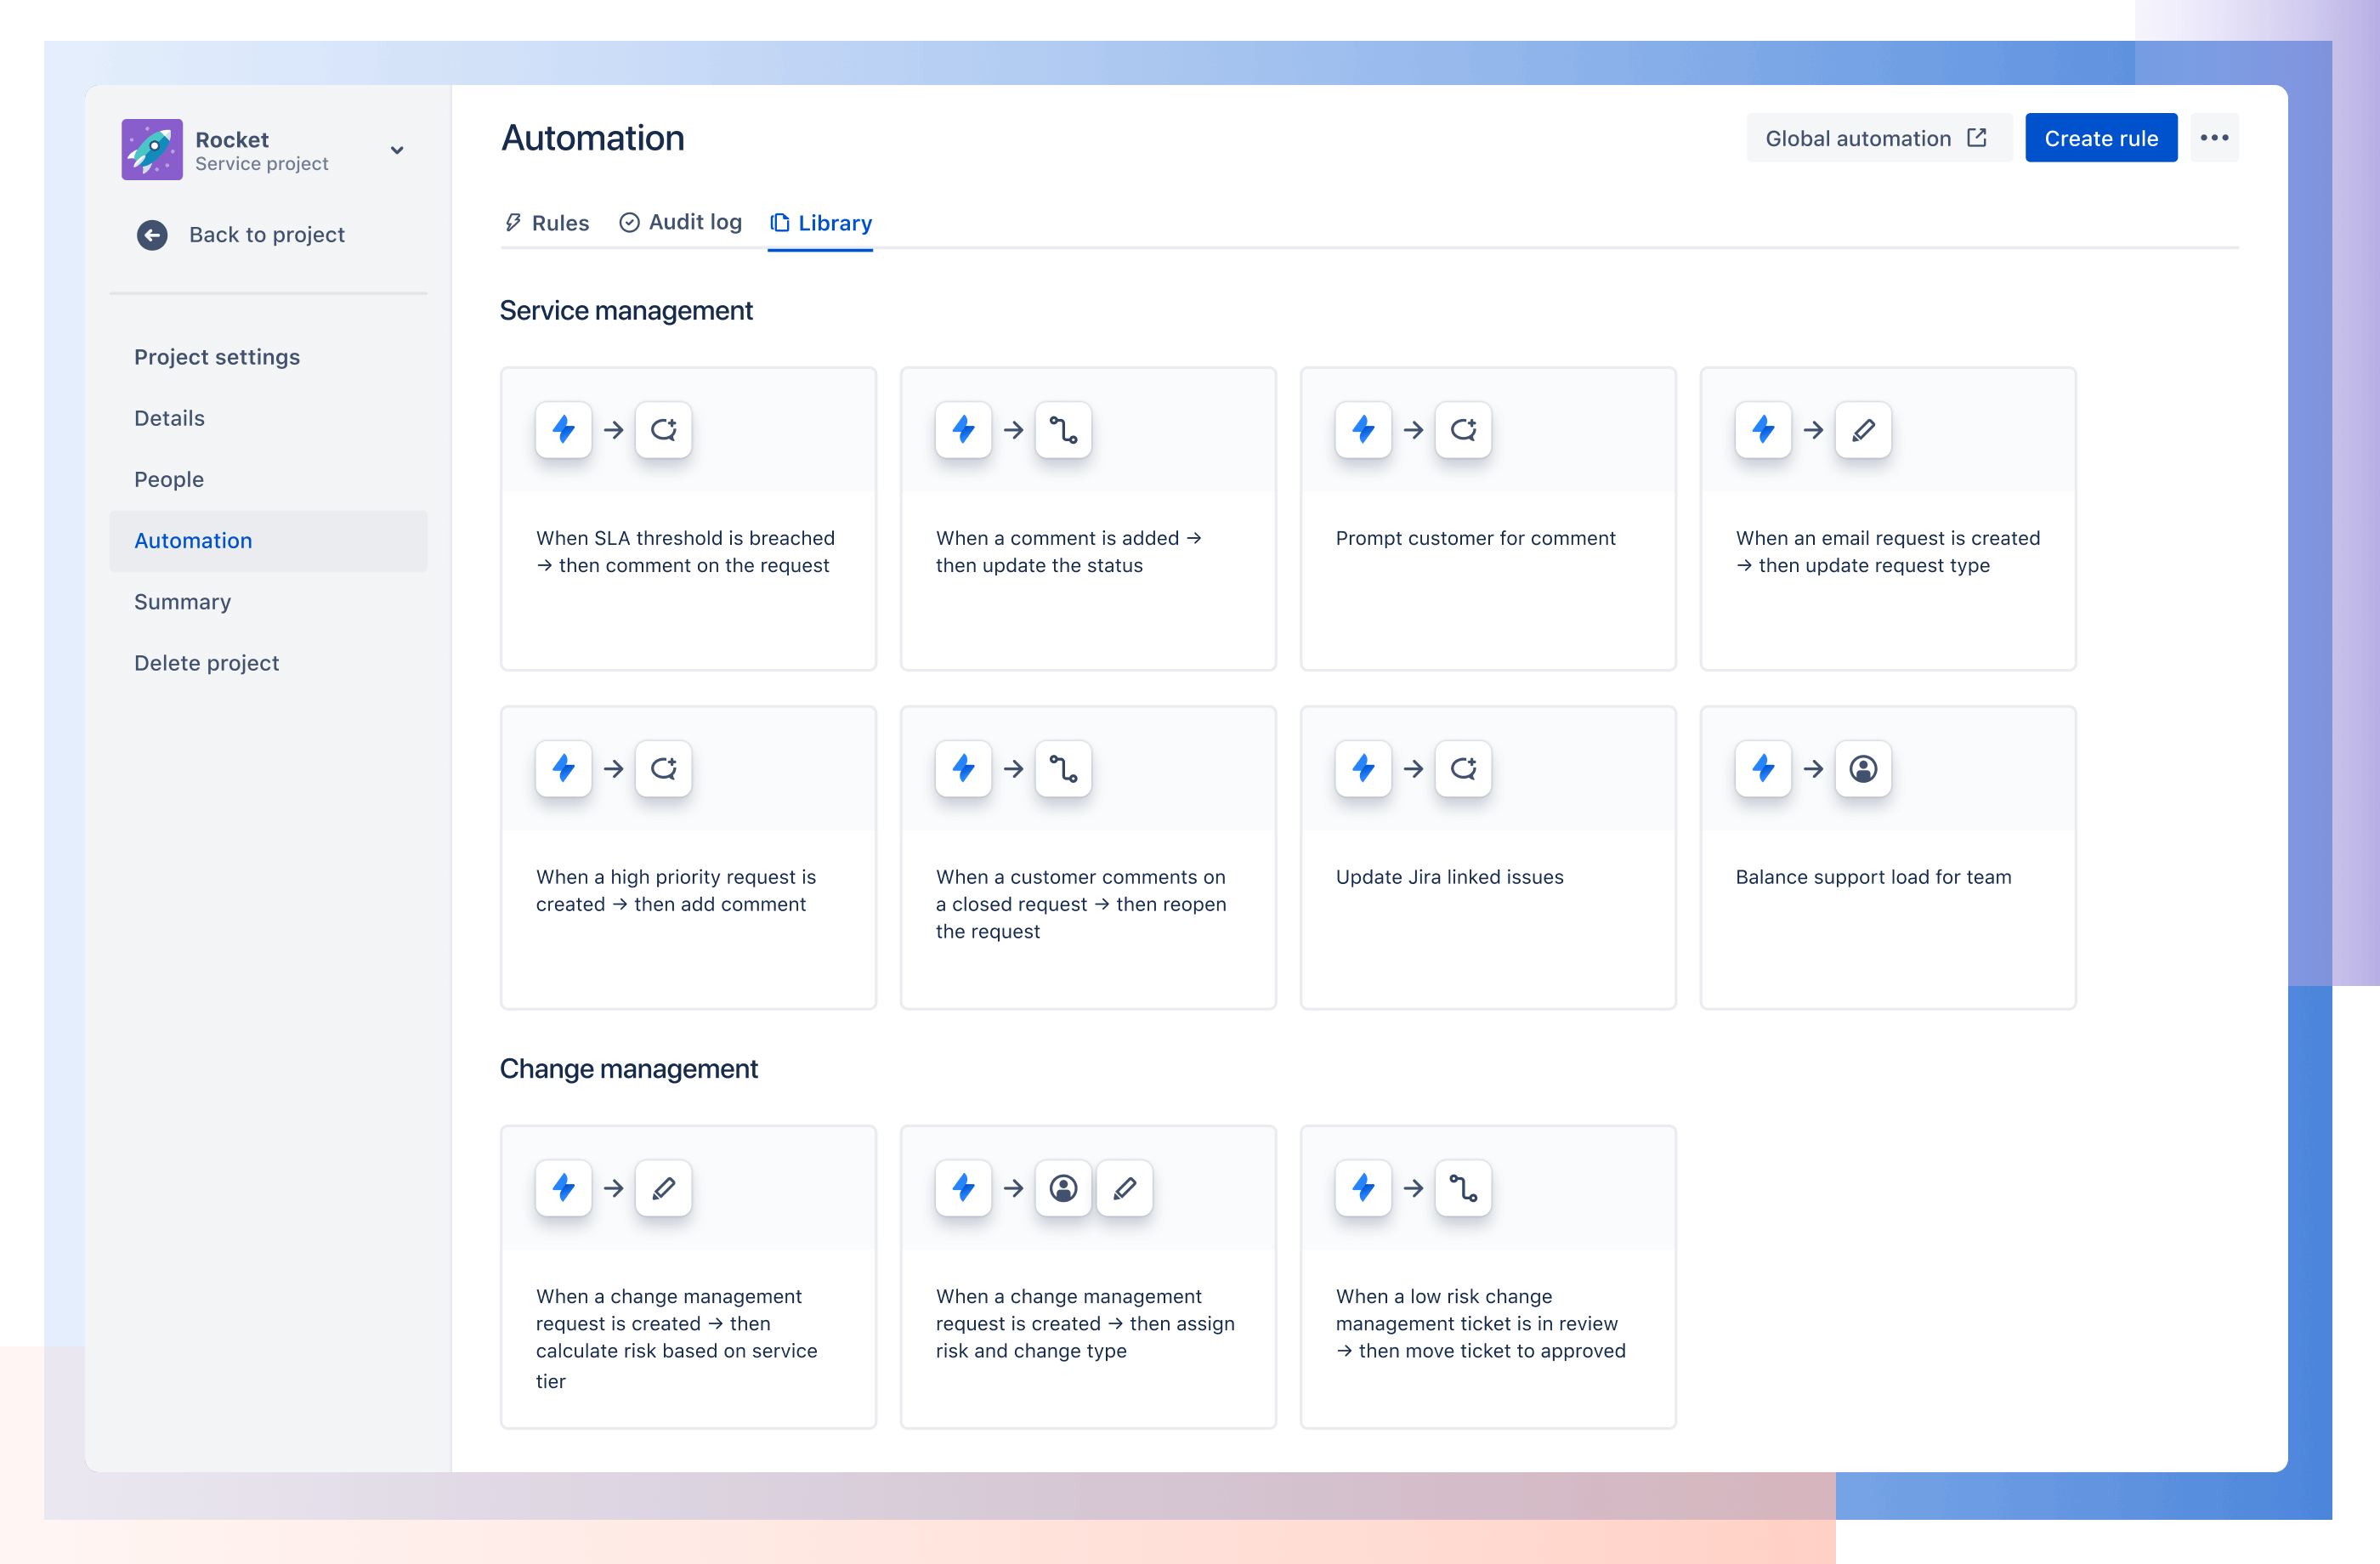 Jira automation library under the Service management category